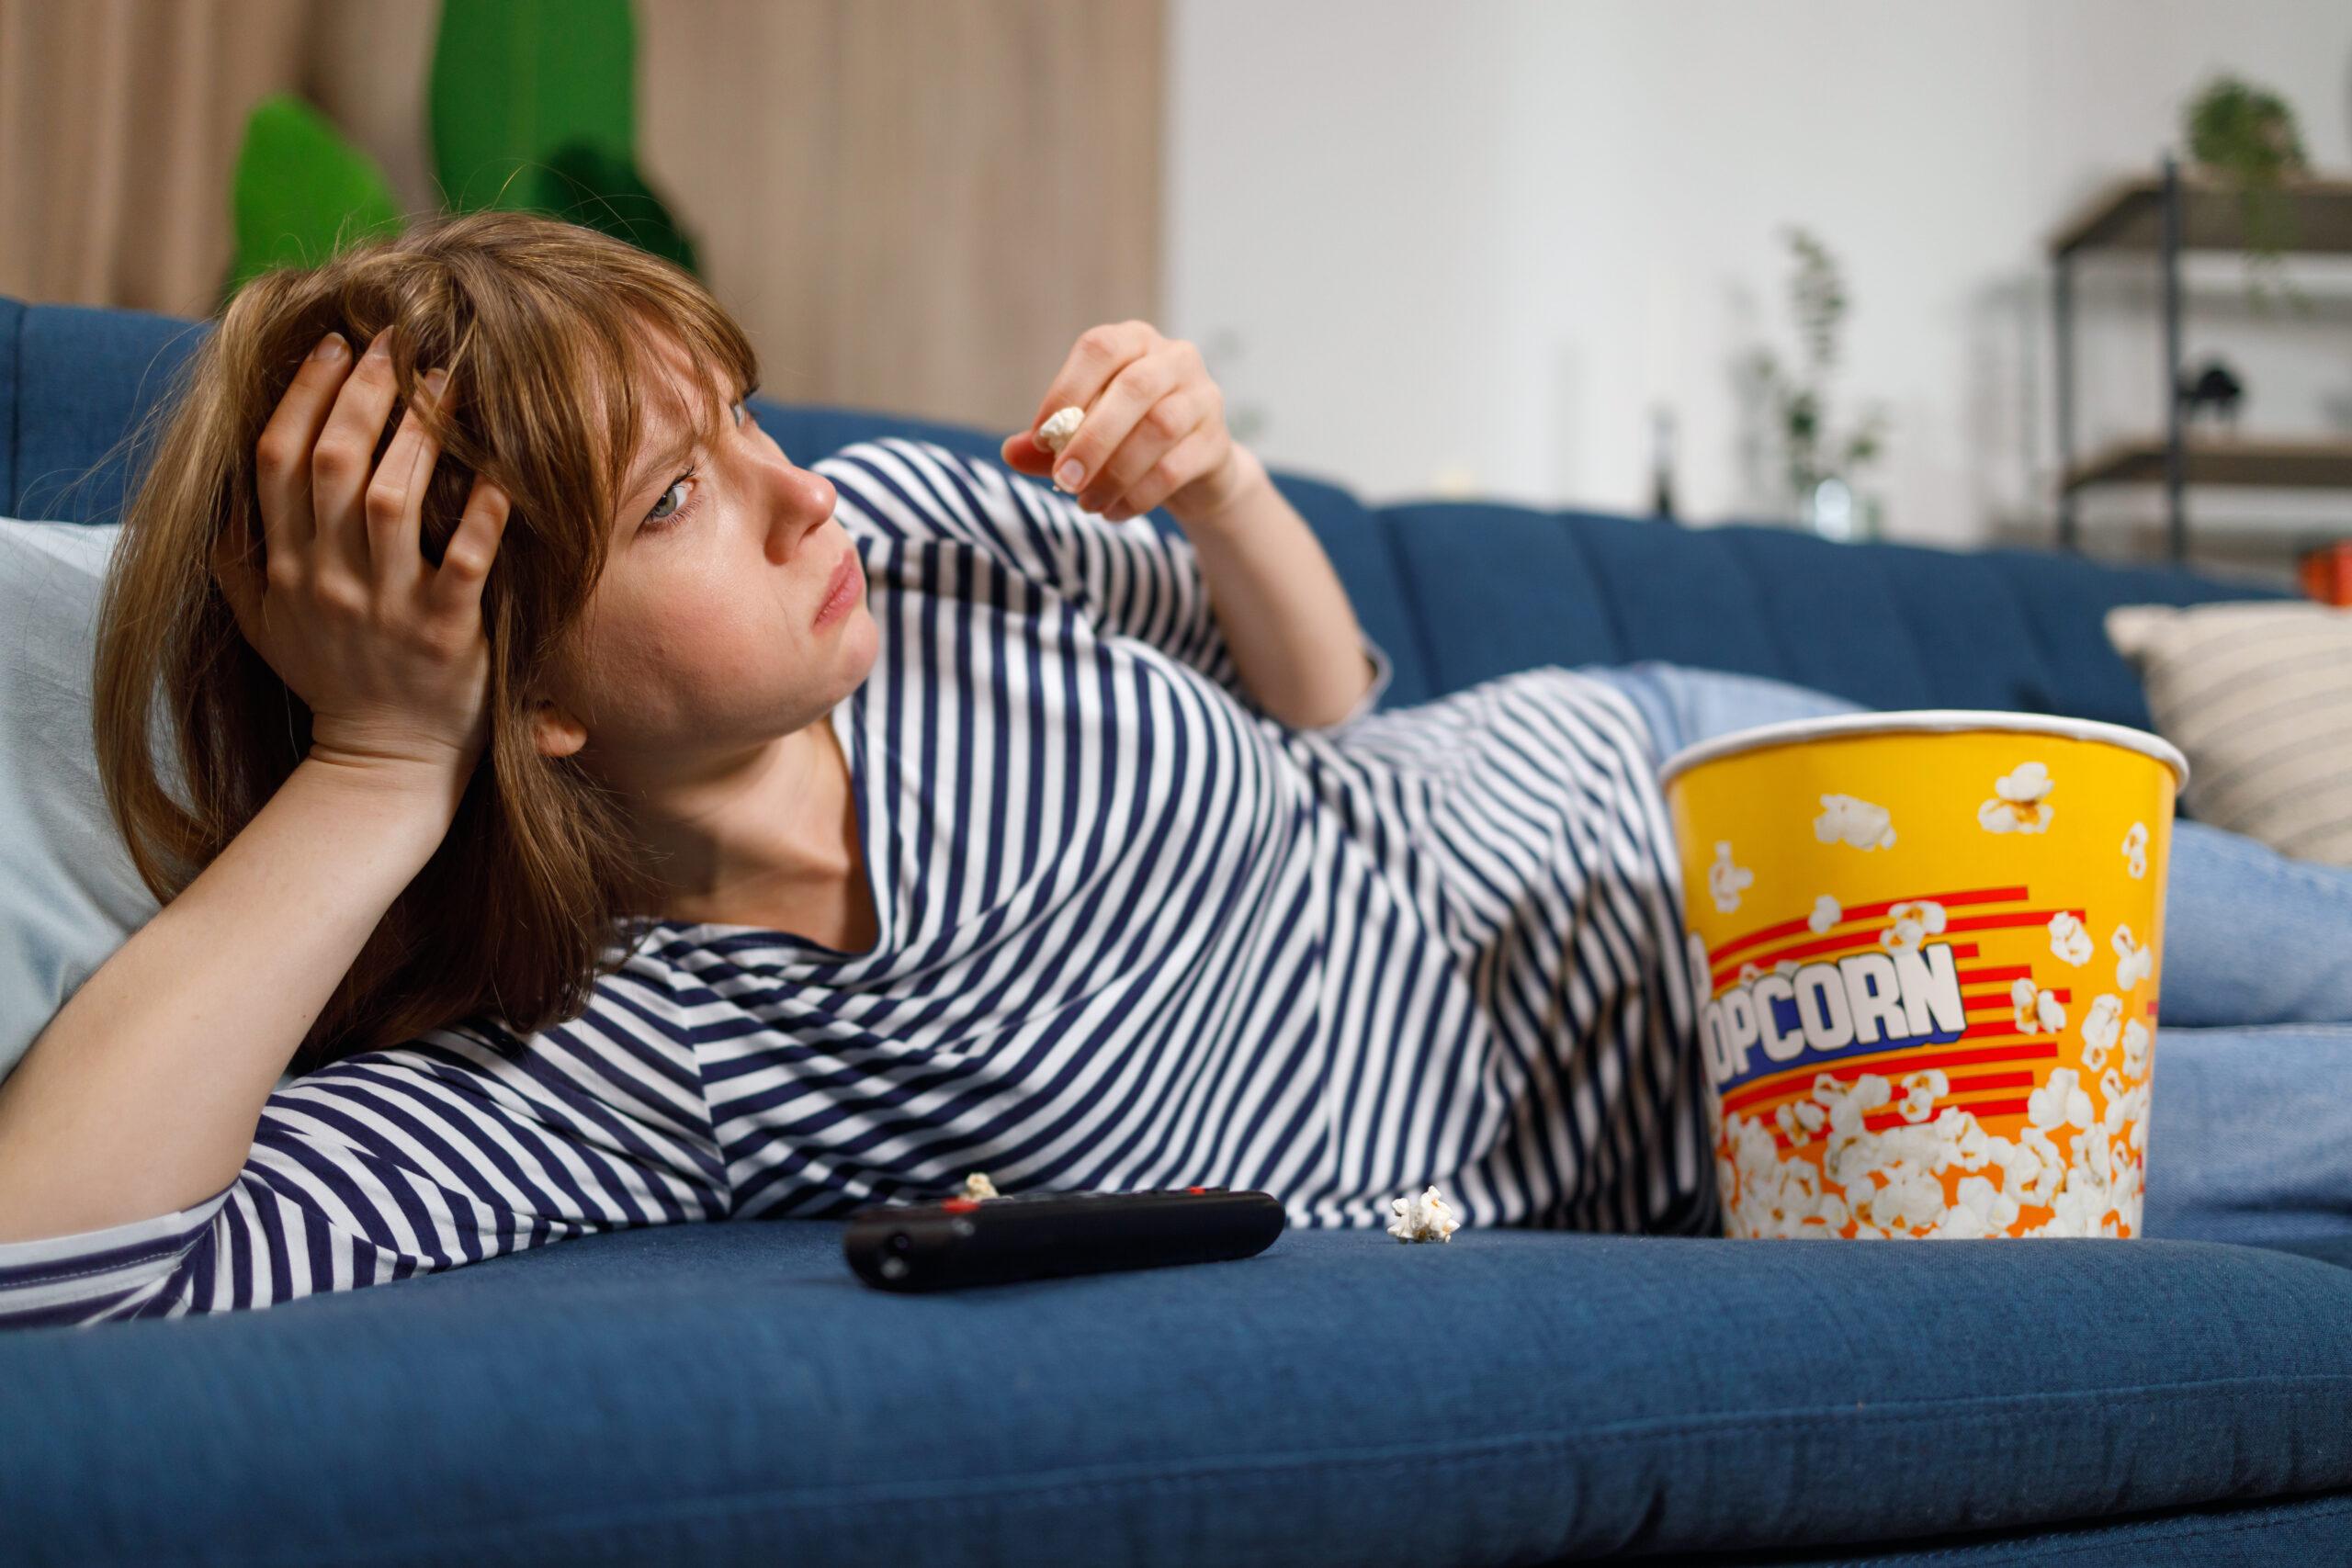 Woman watching a boring movie on TV and eating popcorn